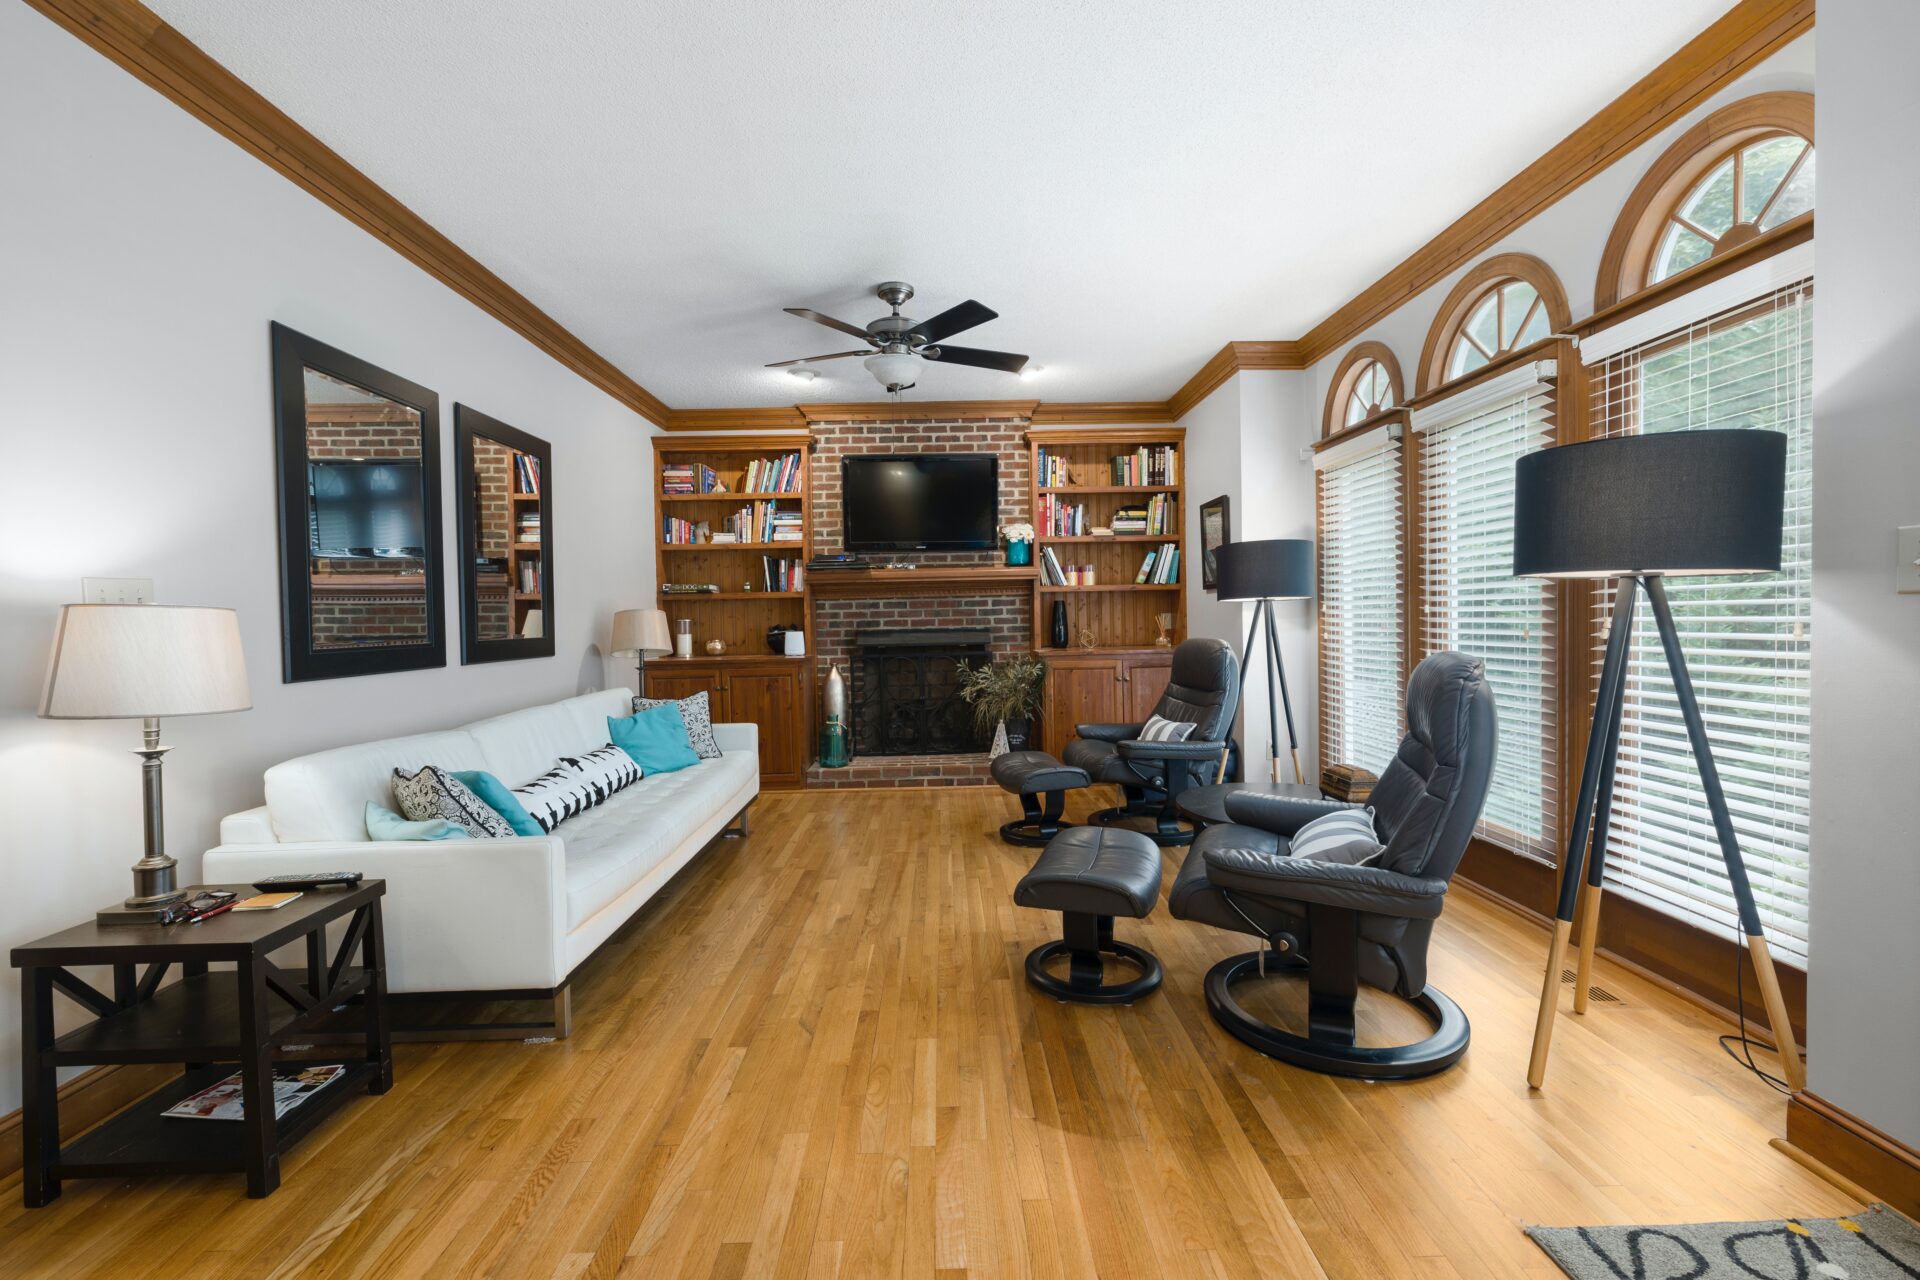 How to Choose the Best Small Ceiling Fan for a Tiny Home